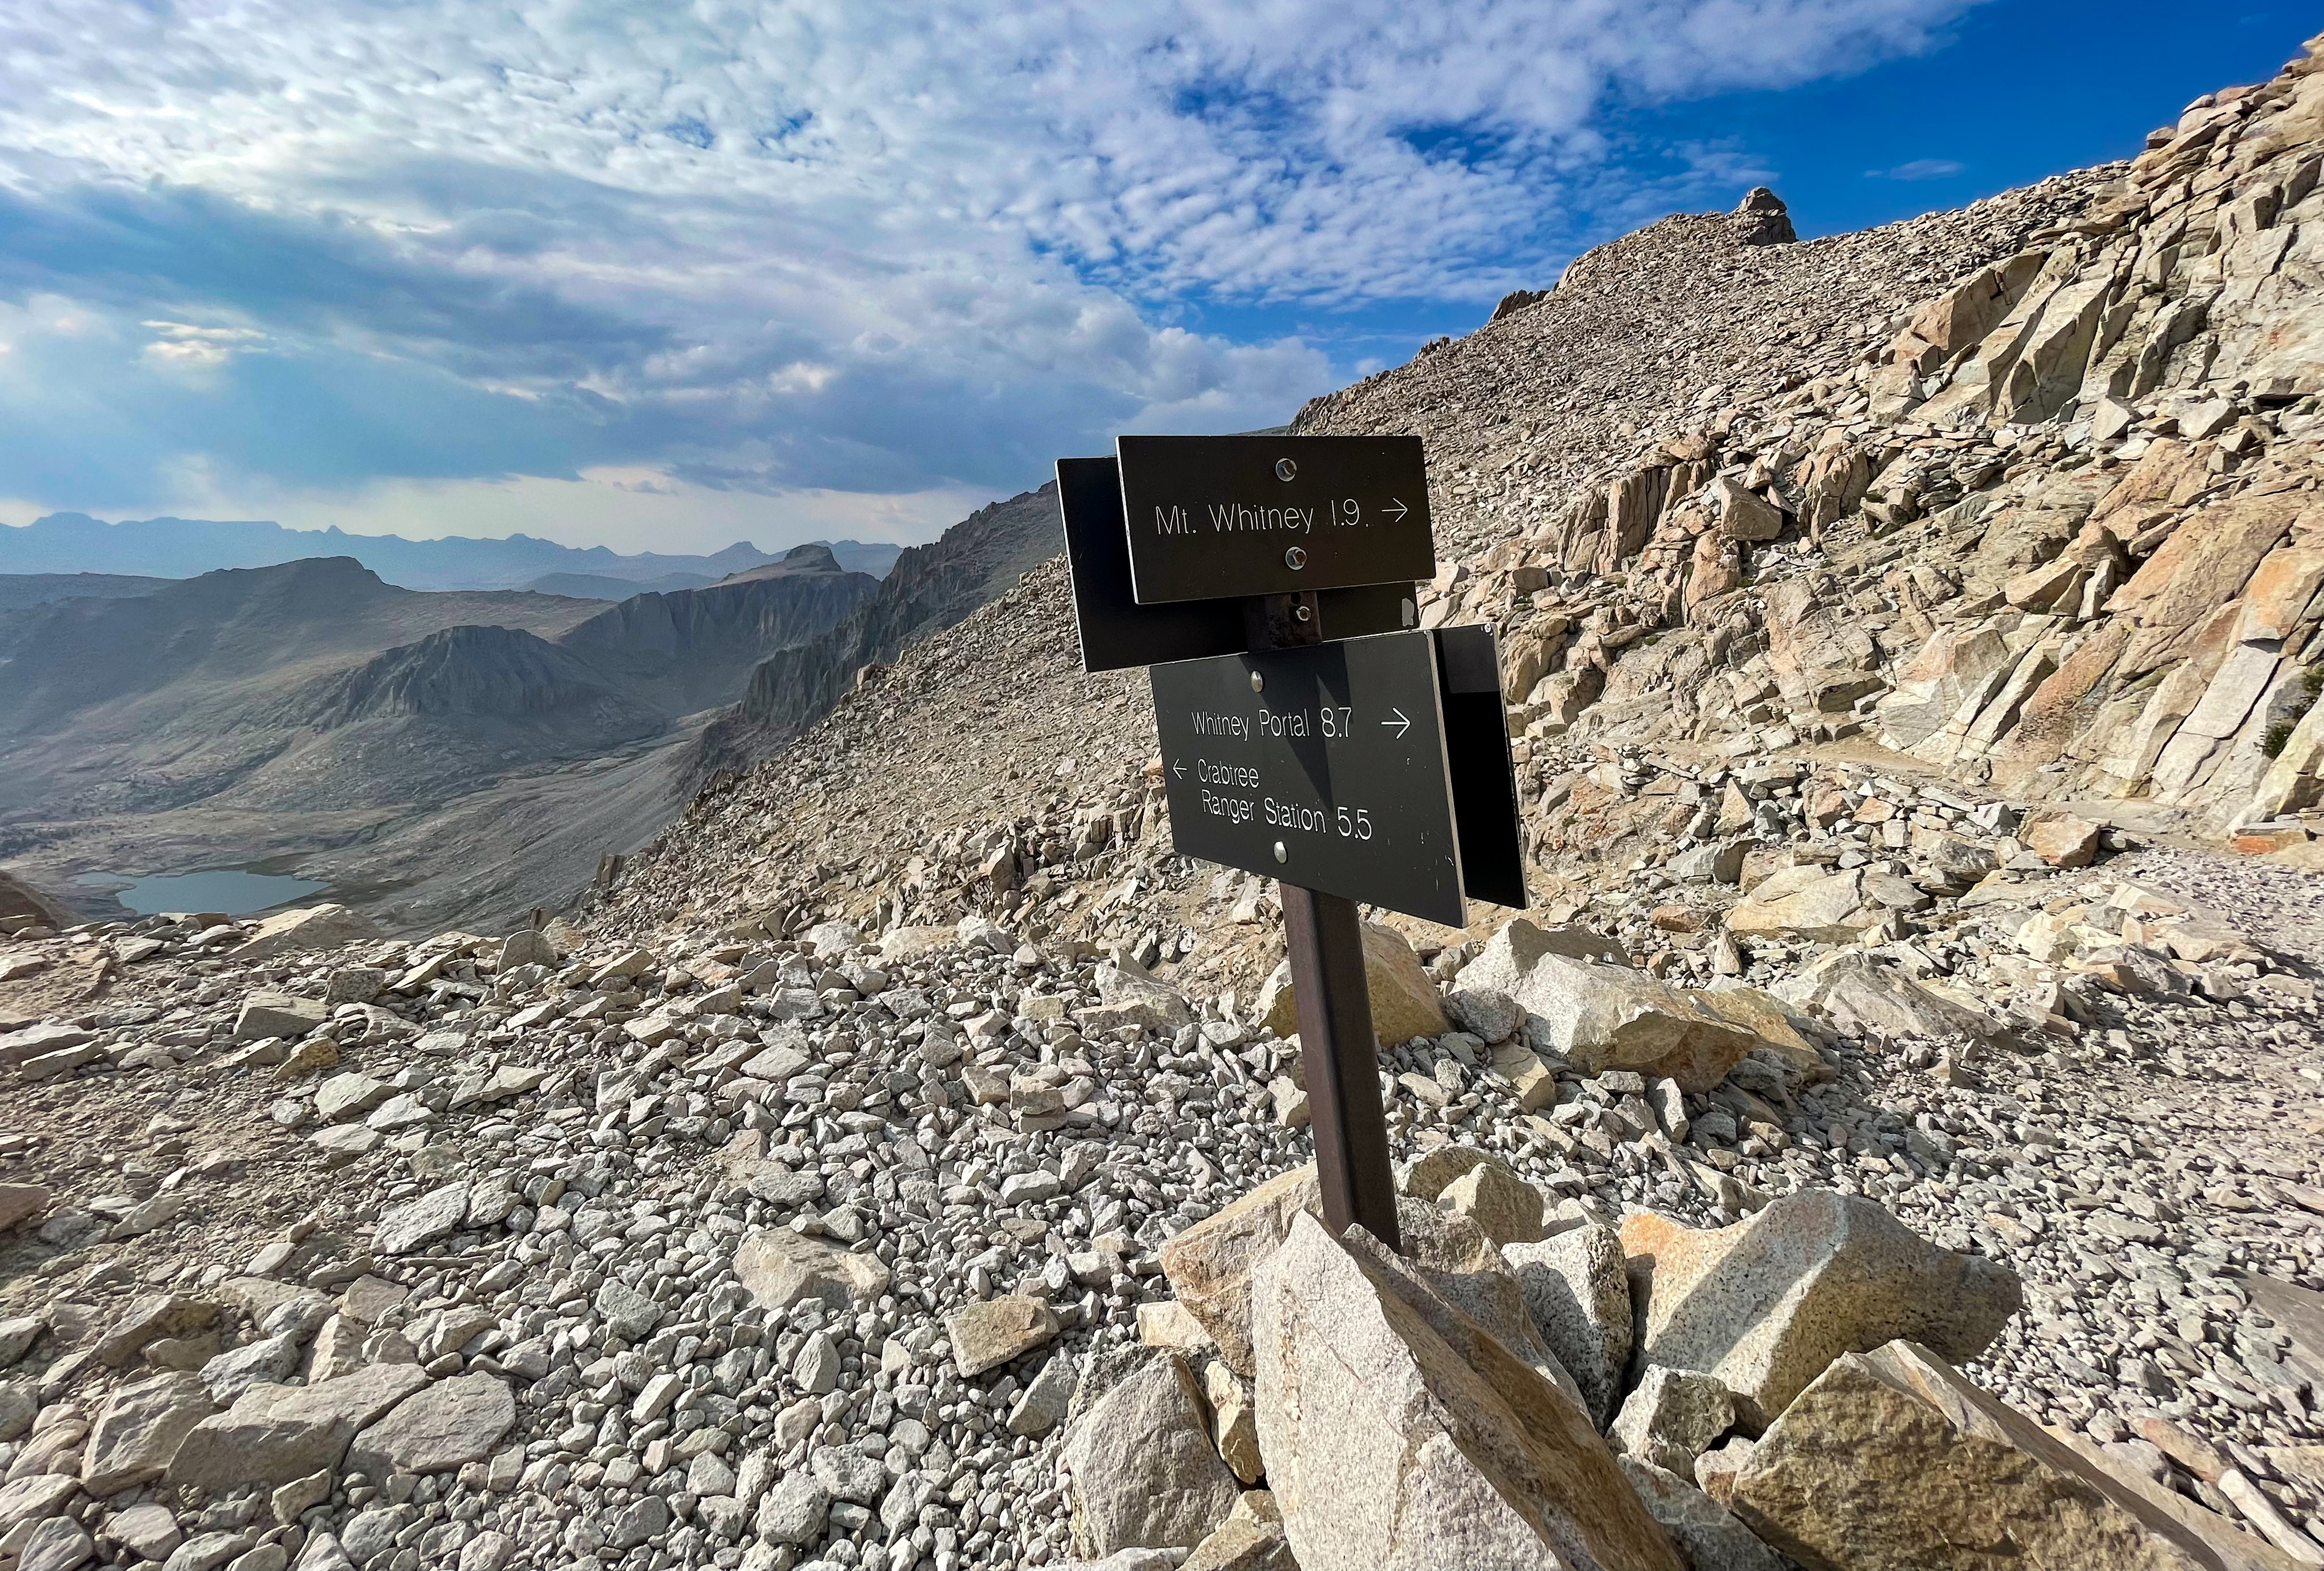 Mt. Whitney Trail and JMT junction